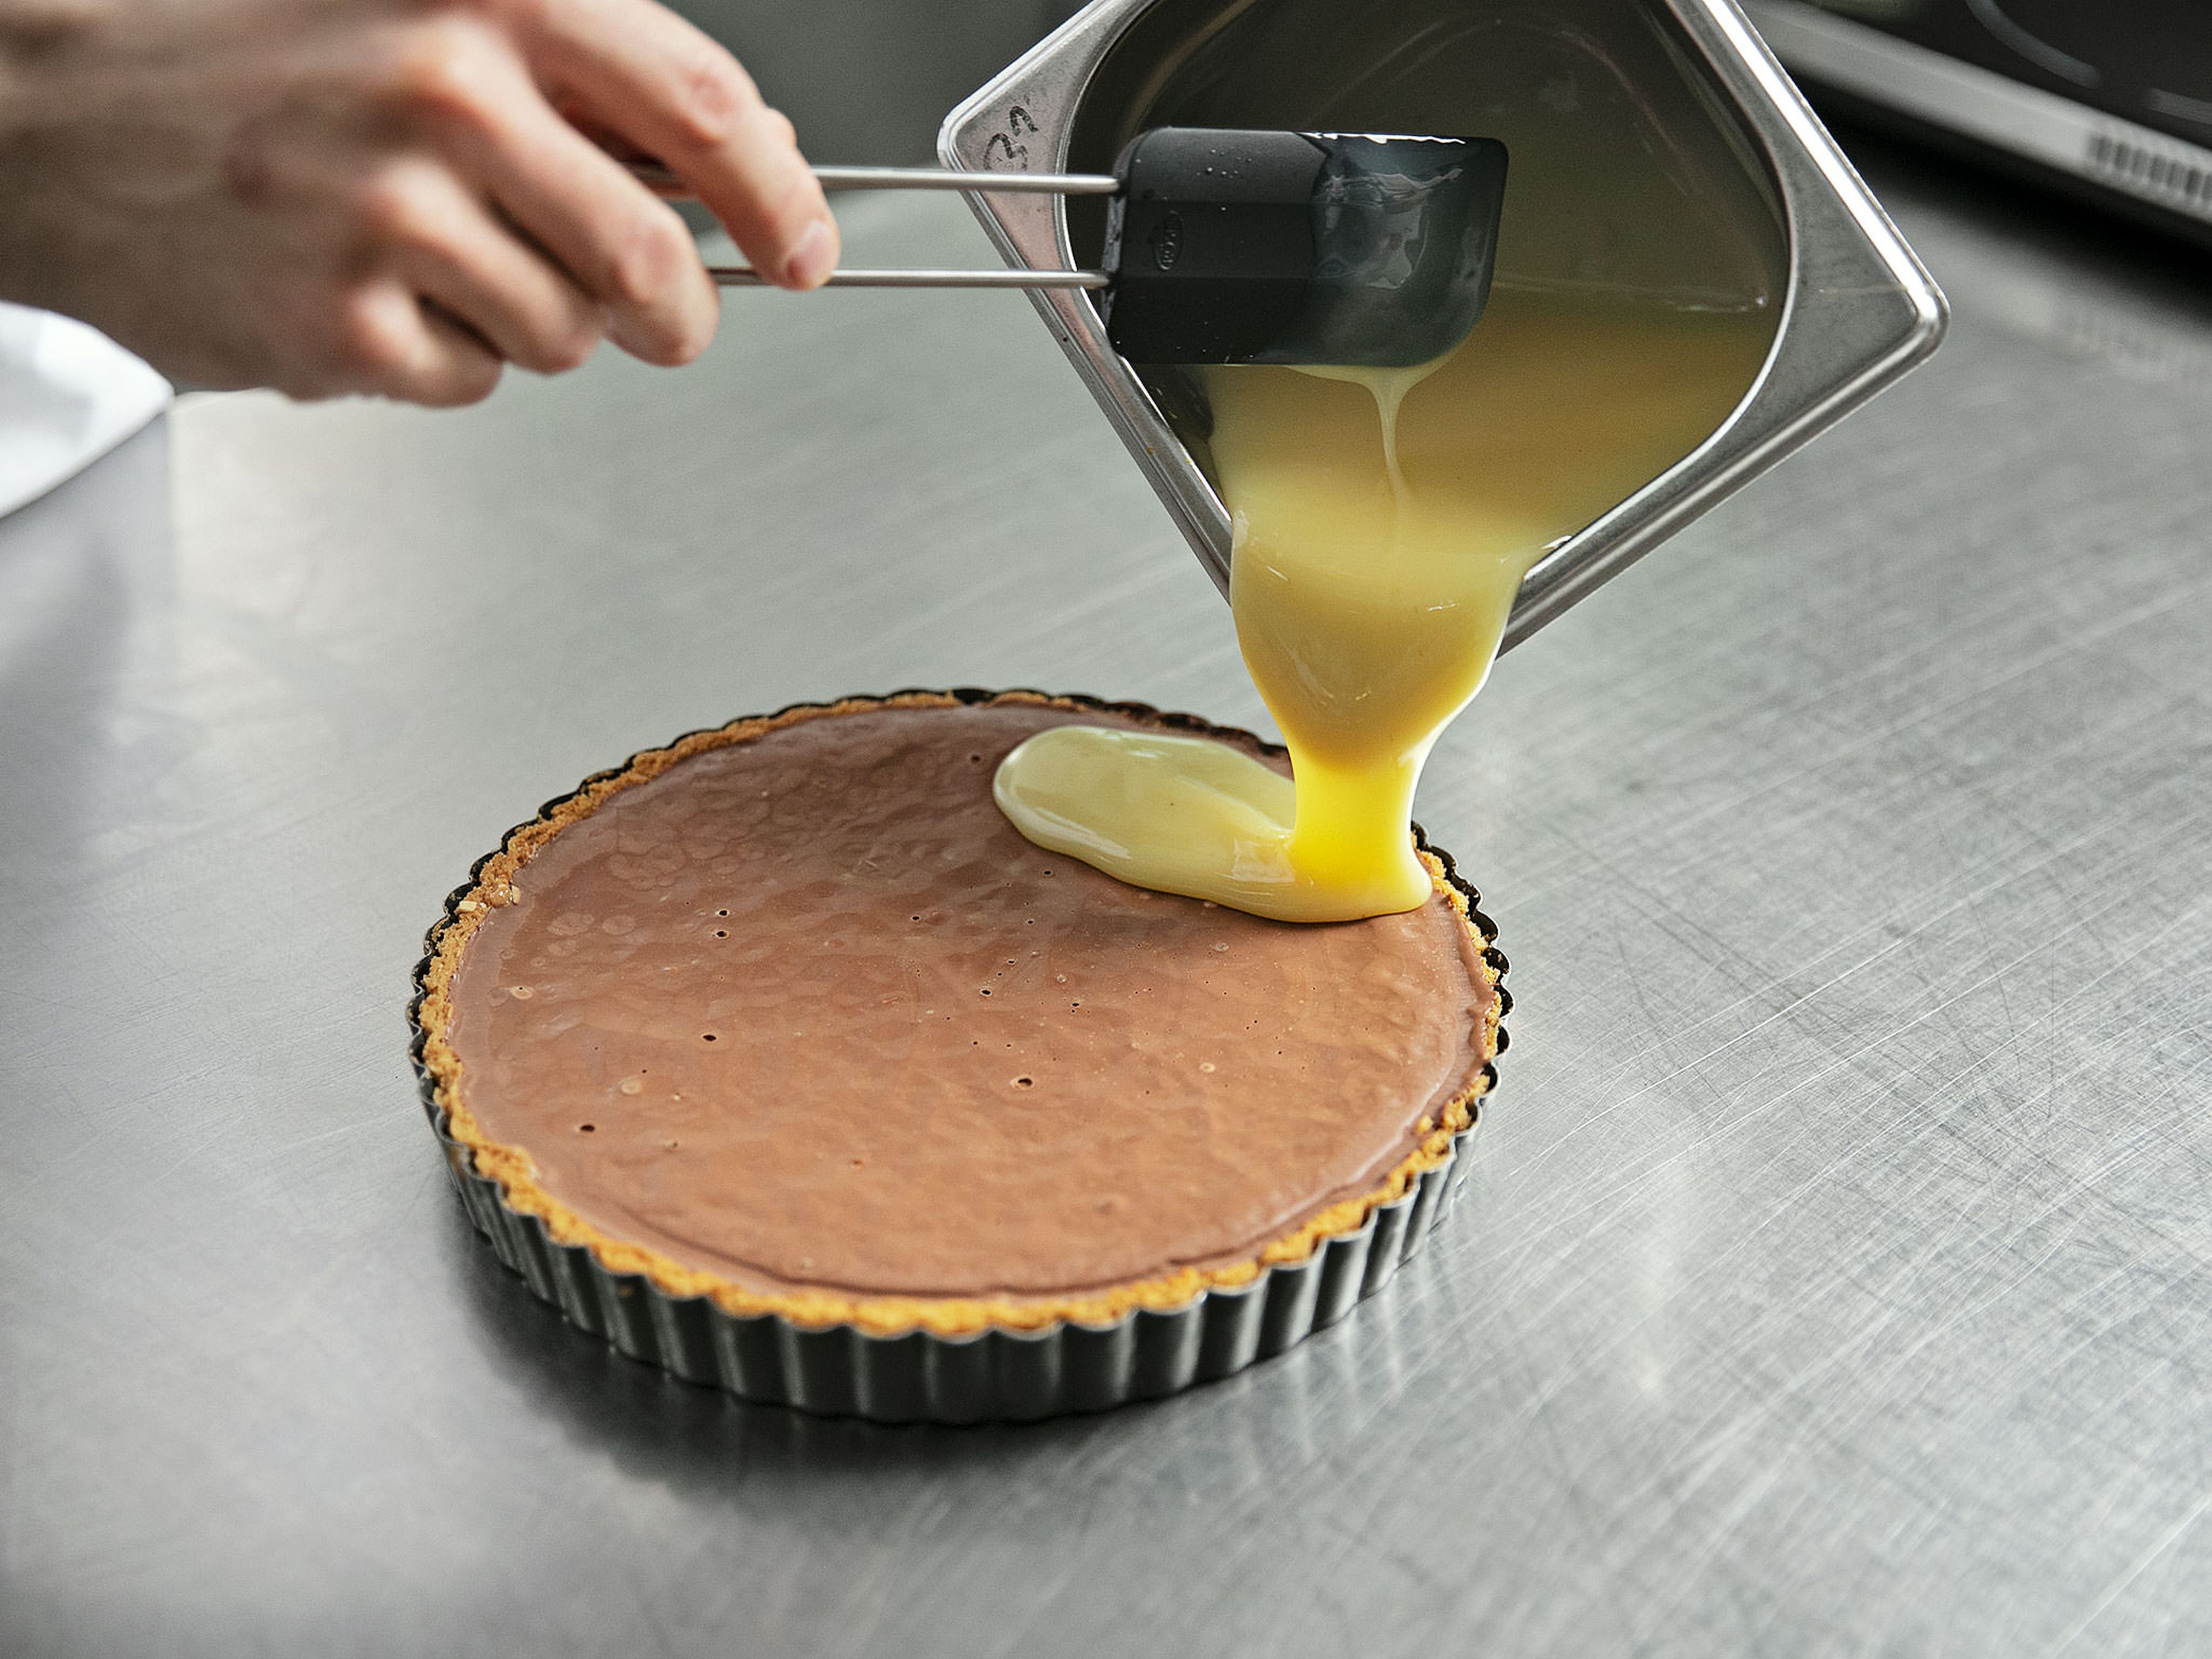 Remove cooled tart from the fridge and distribute the ganache on it. Allow to cool for approx. 4 hrs. Chop the caramelized hazelnuts and set aside. Remove tart from the fridge spread orange filling onto the tart.